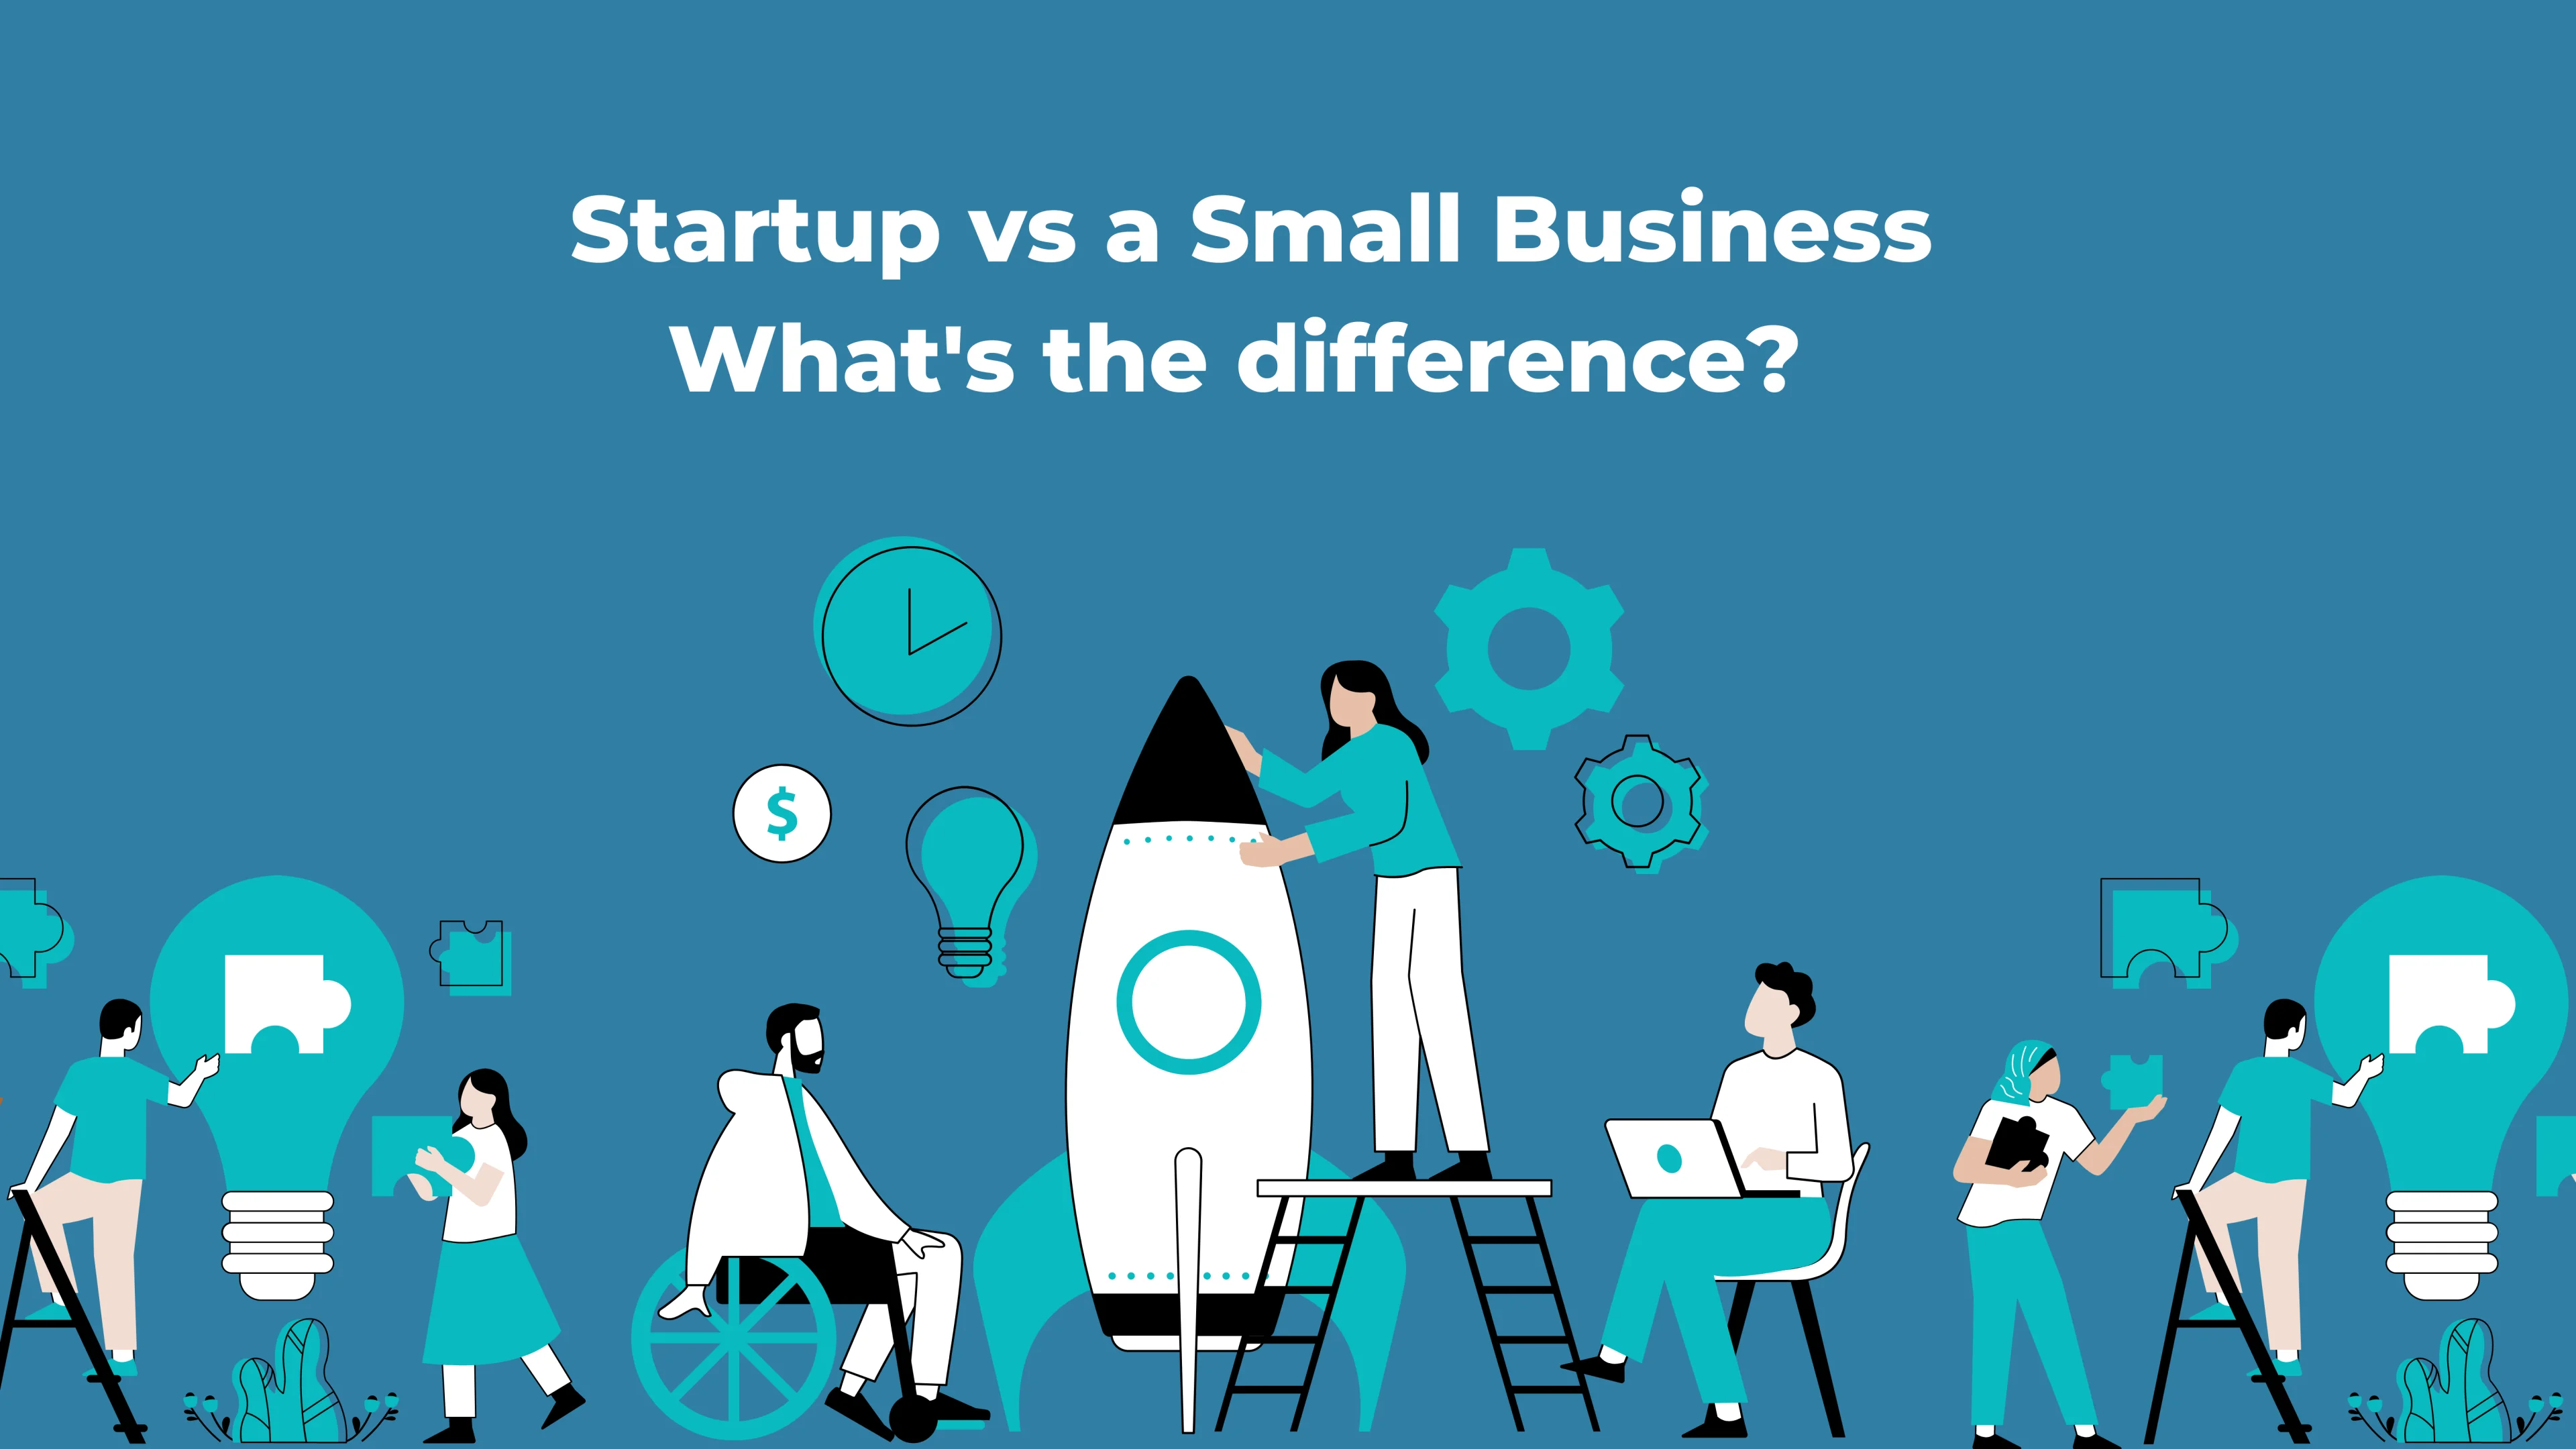 From development goals to funding, what's the difference between a startup company vs. small business - and why does it matter?